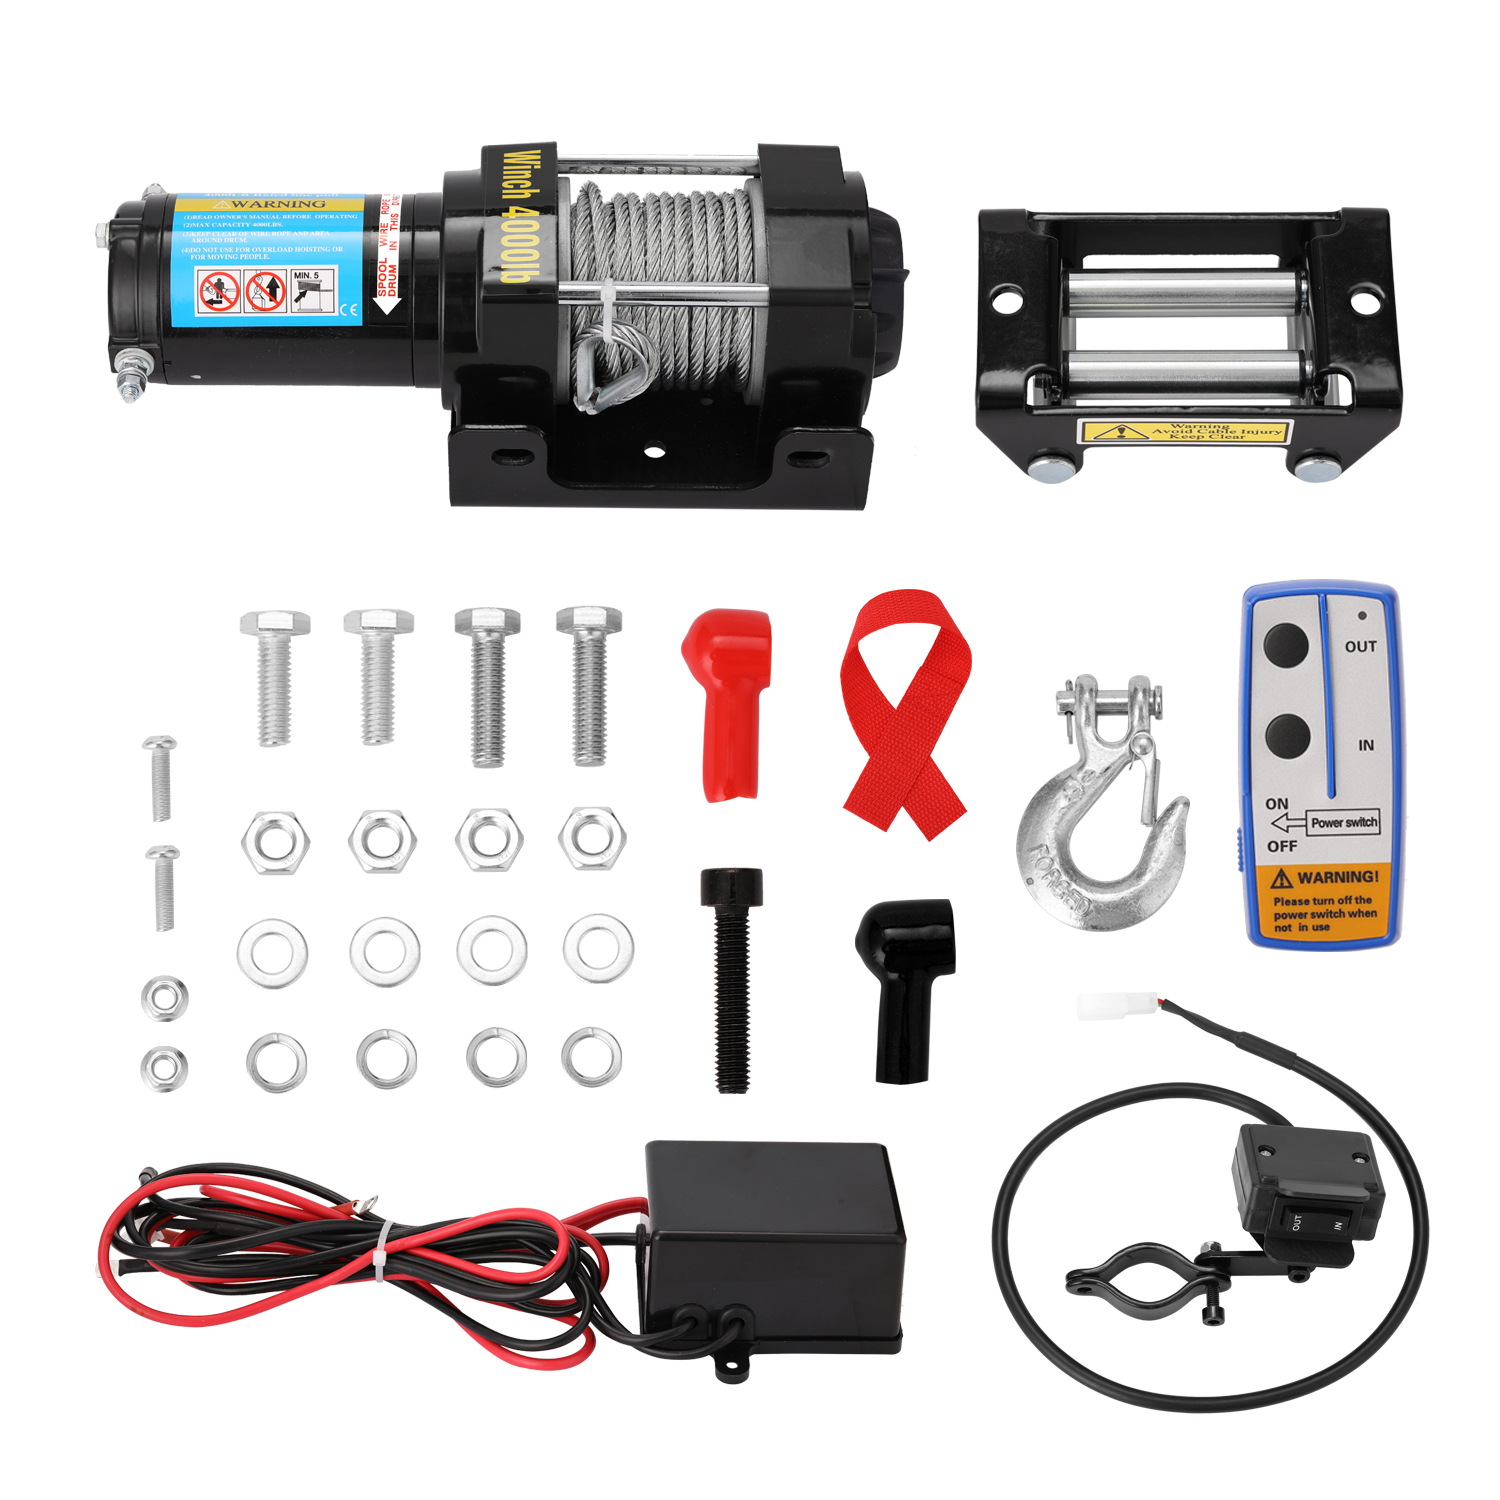 Electric Recovery Winch Kit 4000lbs лебедка ATV Trailer Truck Car DC12V Remote Control Winches cabrestante electrico 12v лебедка